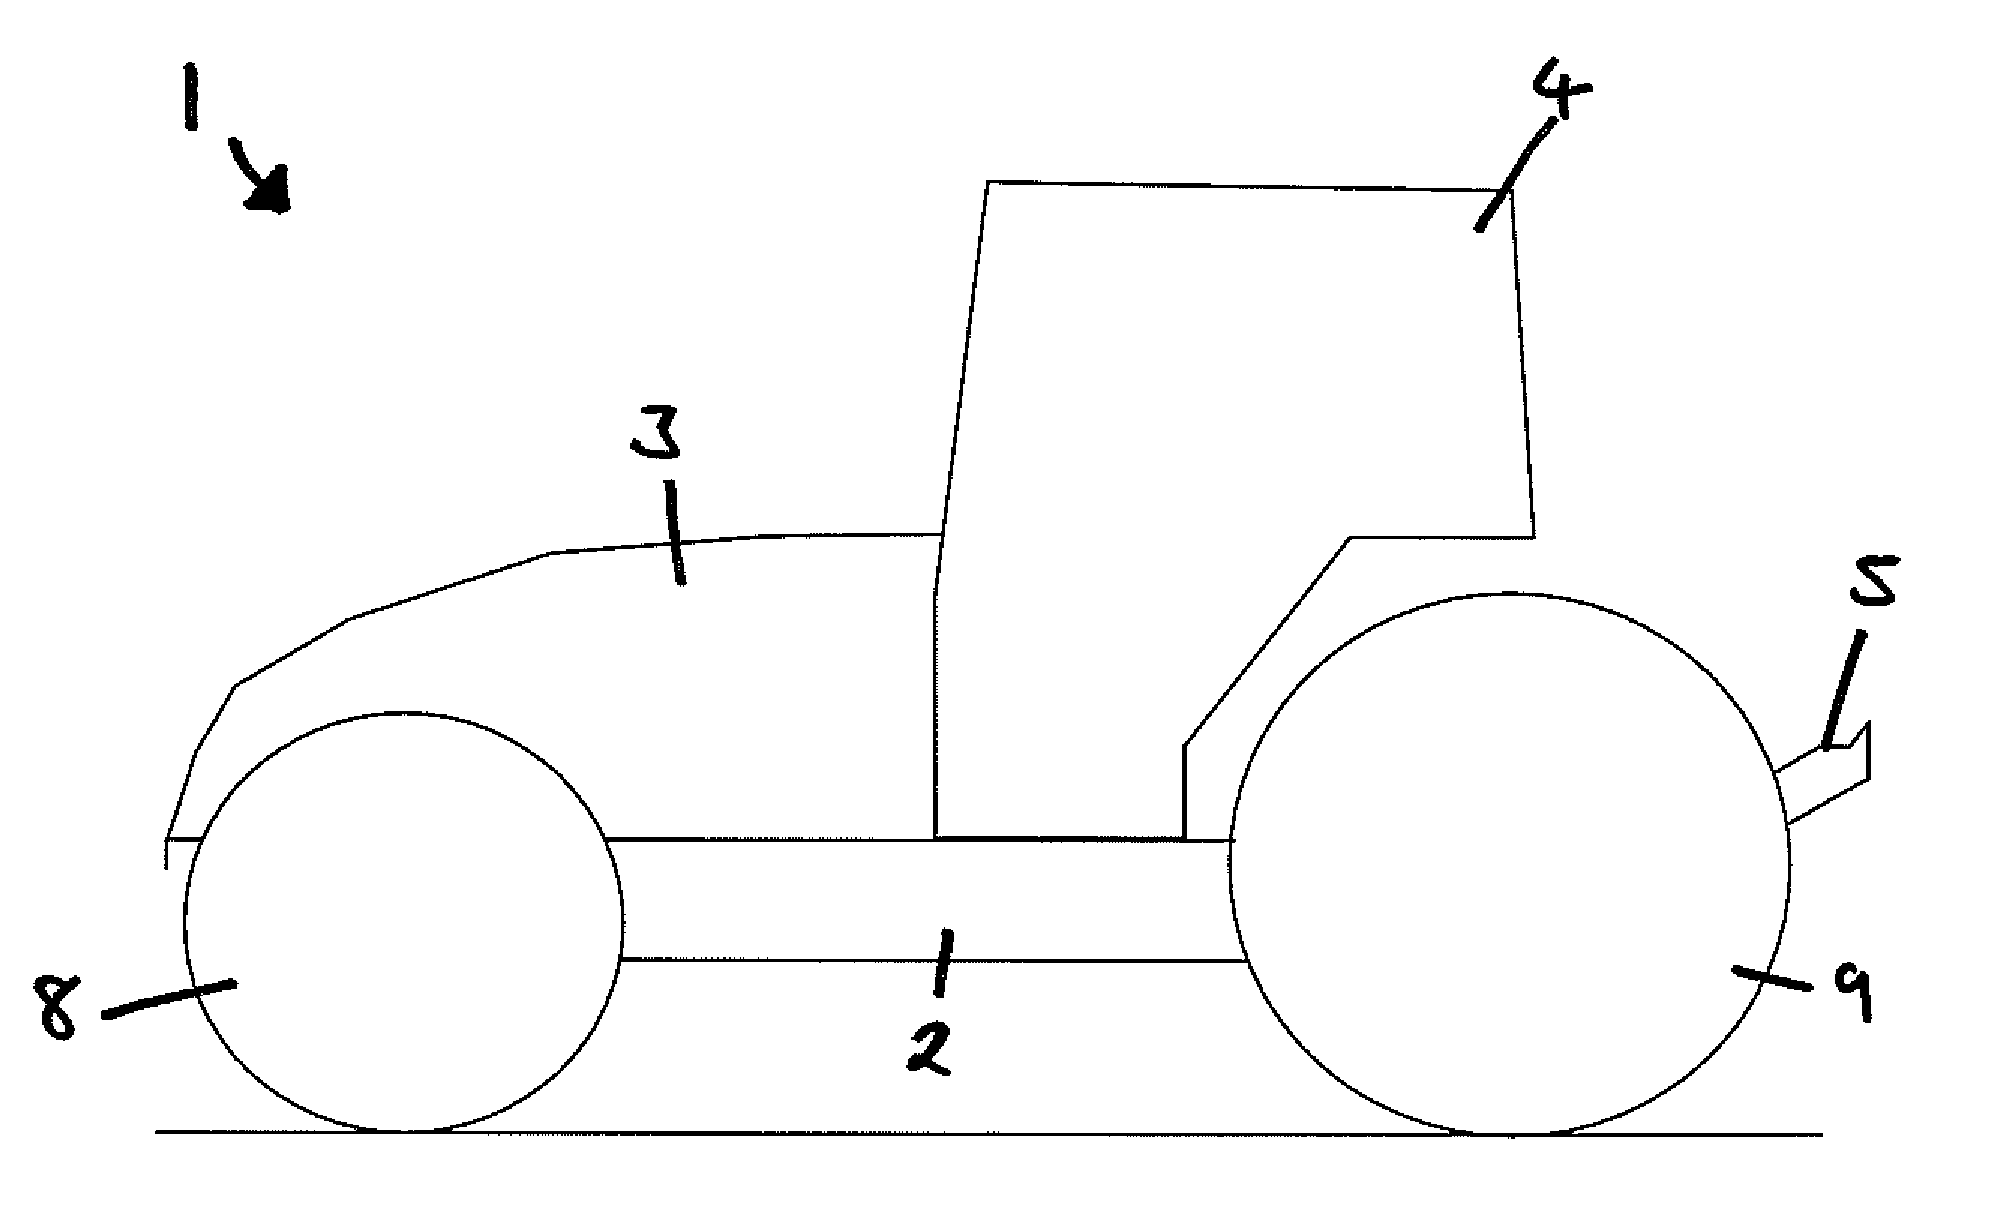 Utility vehicle drive system